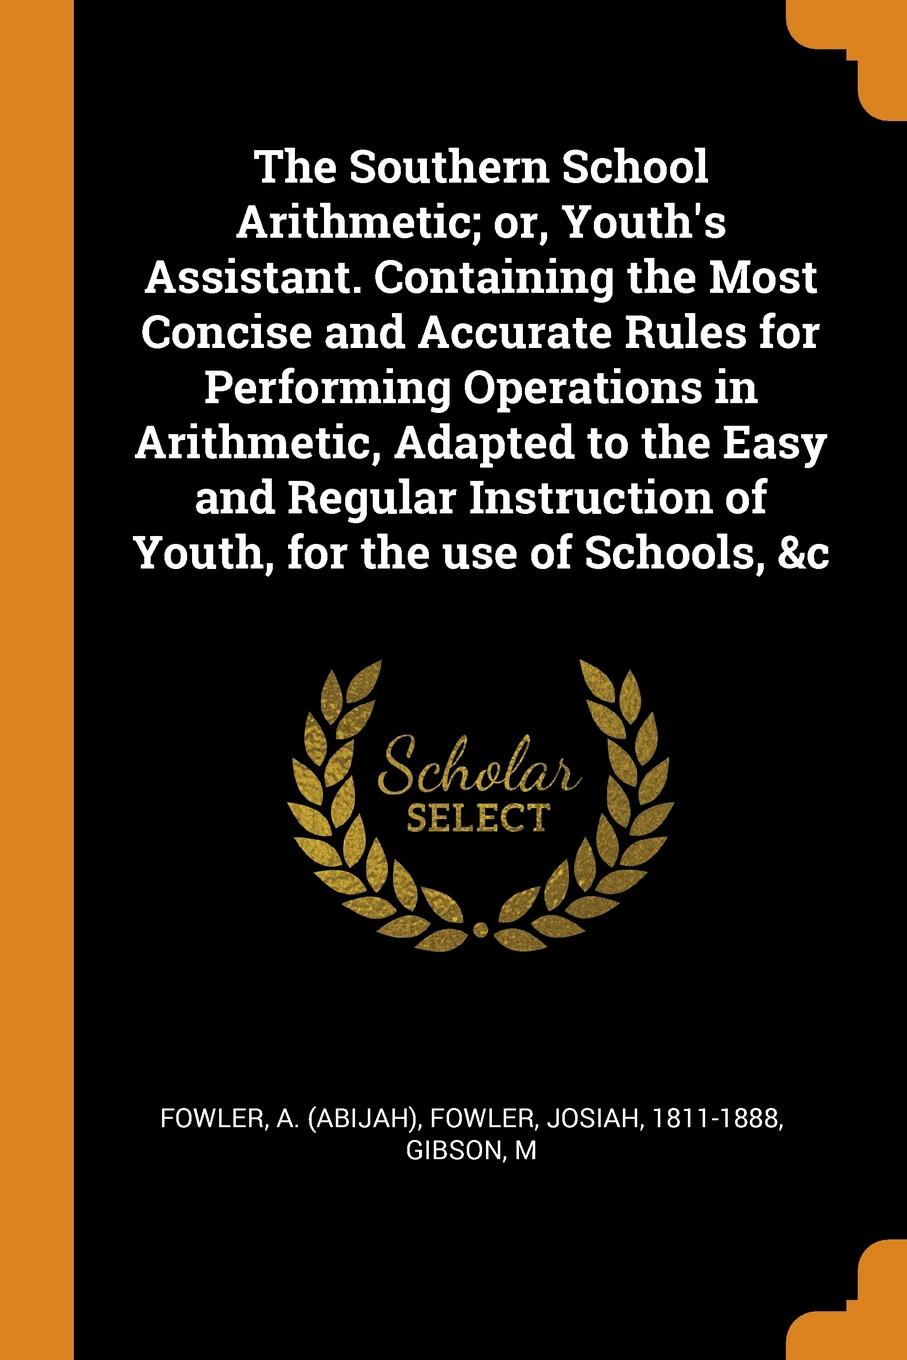 The Southern School Arithmetic; or, Youth.s Assistant. Containing the Most Concise and Accurate Rules for Performing Operations in Arithmetic, Adapted to the Easy and Regular Instruction of Youth, for the use of Schools, .c